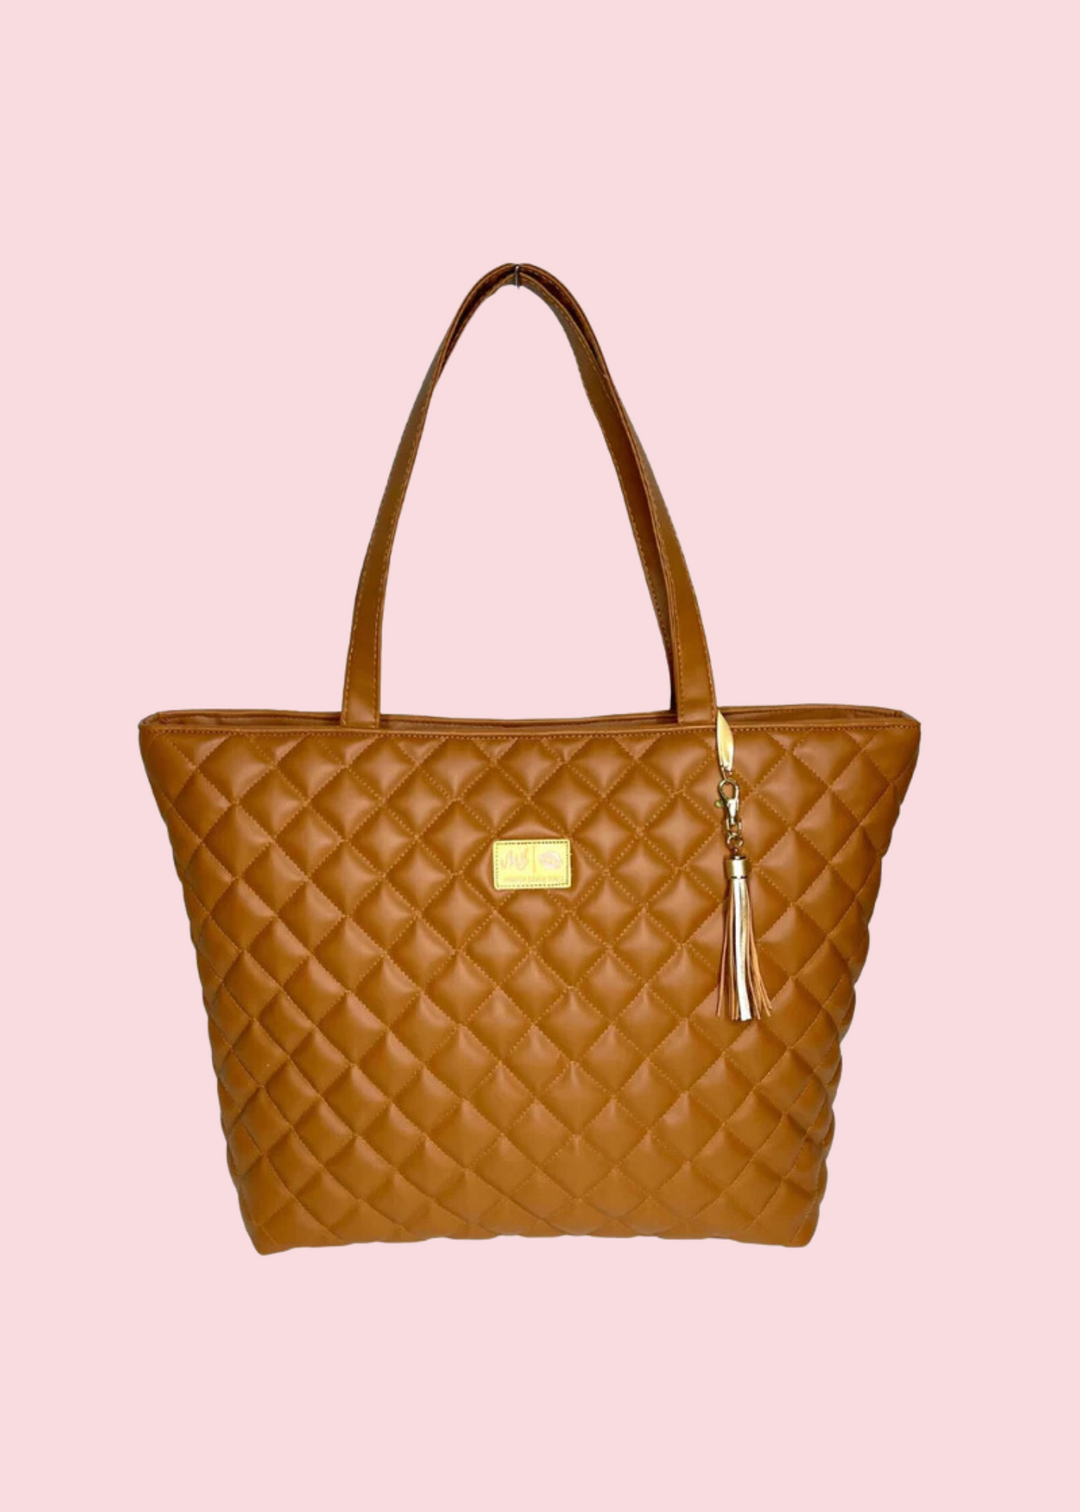 Makeup Junkie Bags - Luxe Cognac Quilted Tote [Pre-Order]